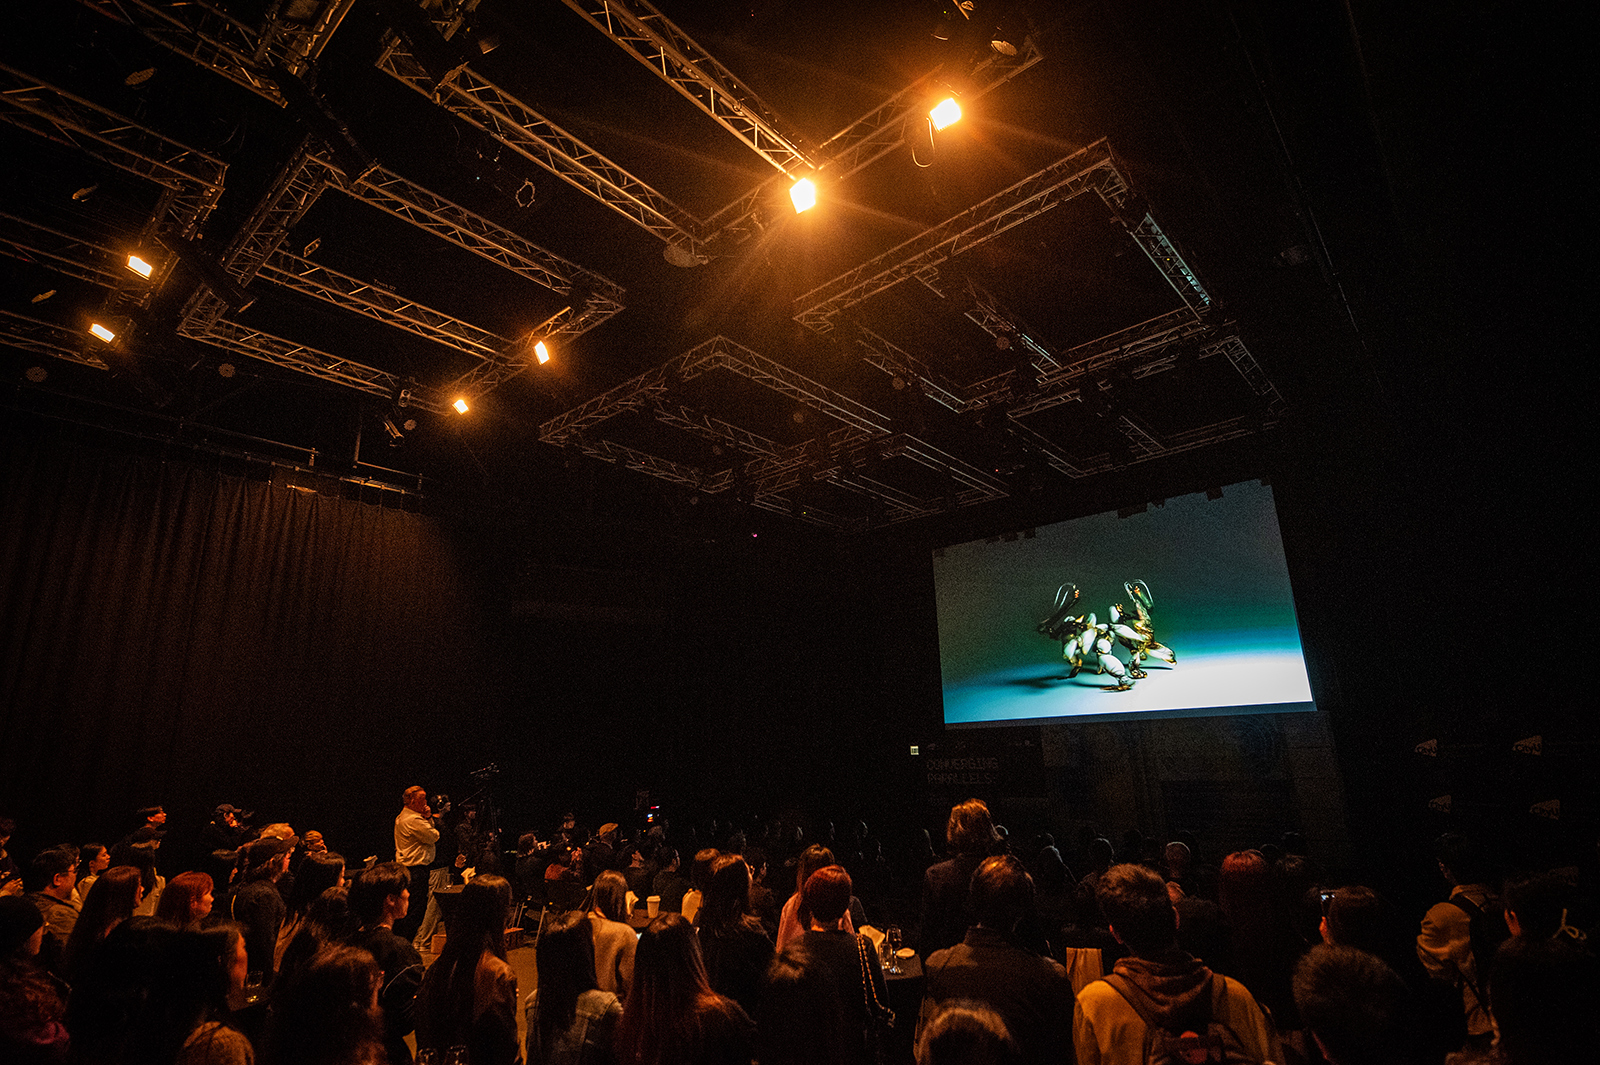 Mythical Creatures – Studies of Shapes and Motions, a video artwork created by Professor Gremmler, which interprets different forms and motions of Chinese mythical characters, is showcased at the opening ceremony. 